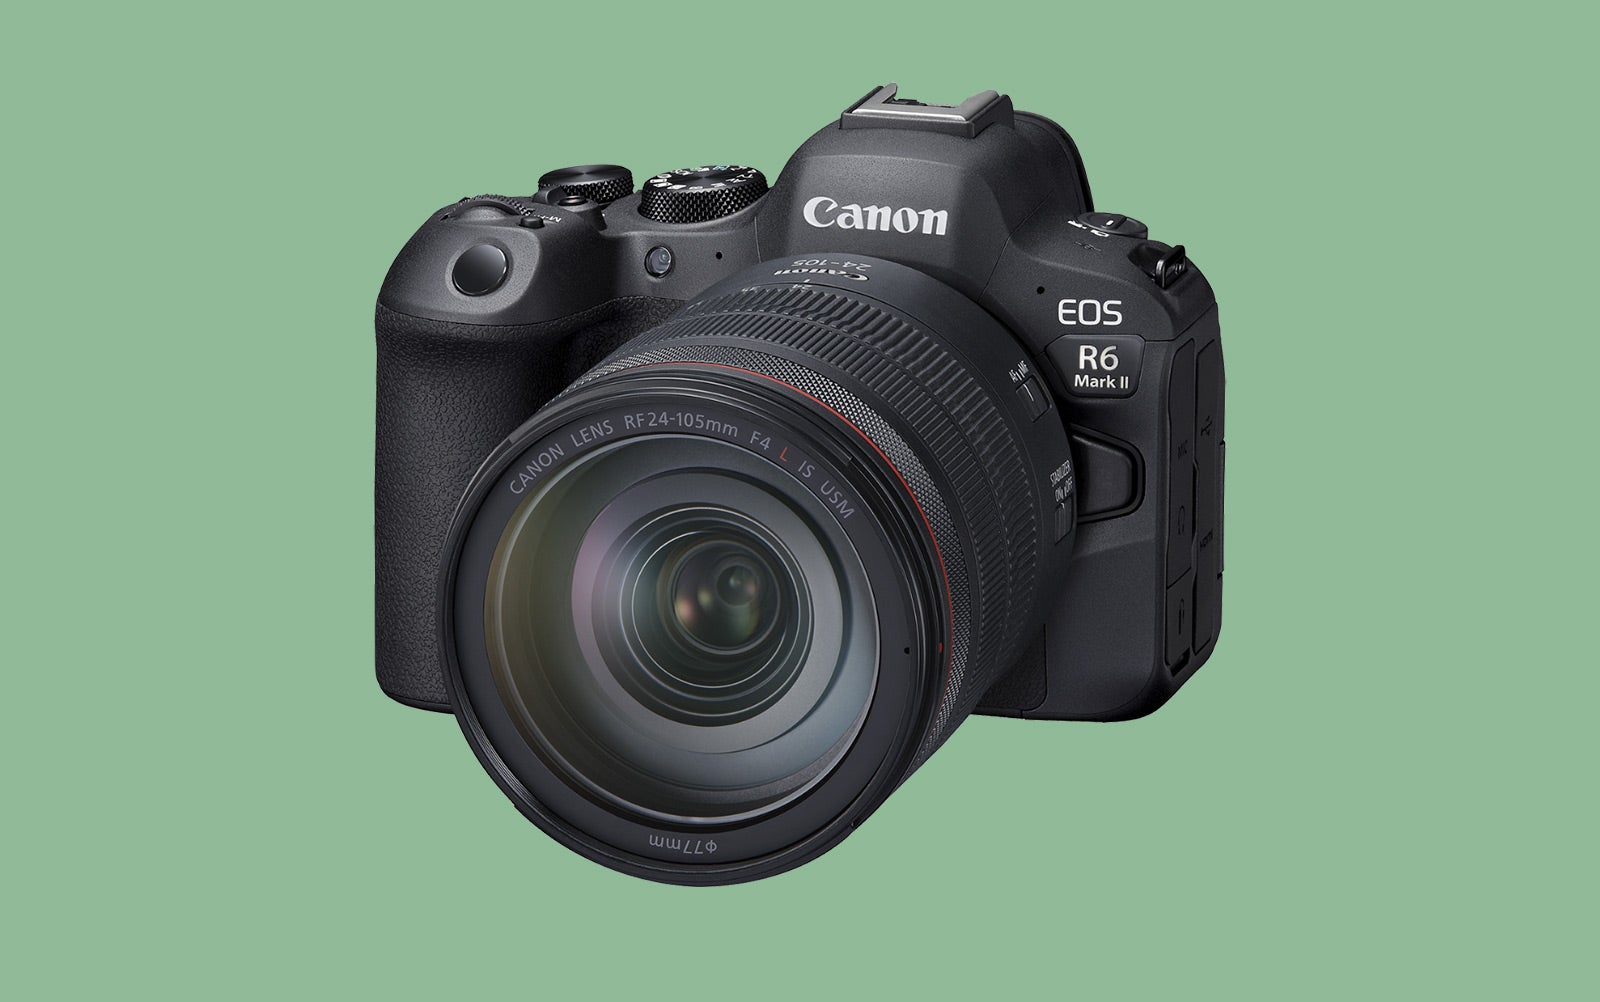 The Canon EOS R6 Mark II has two kit variations.